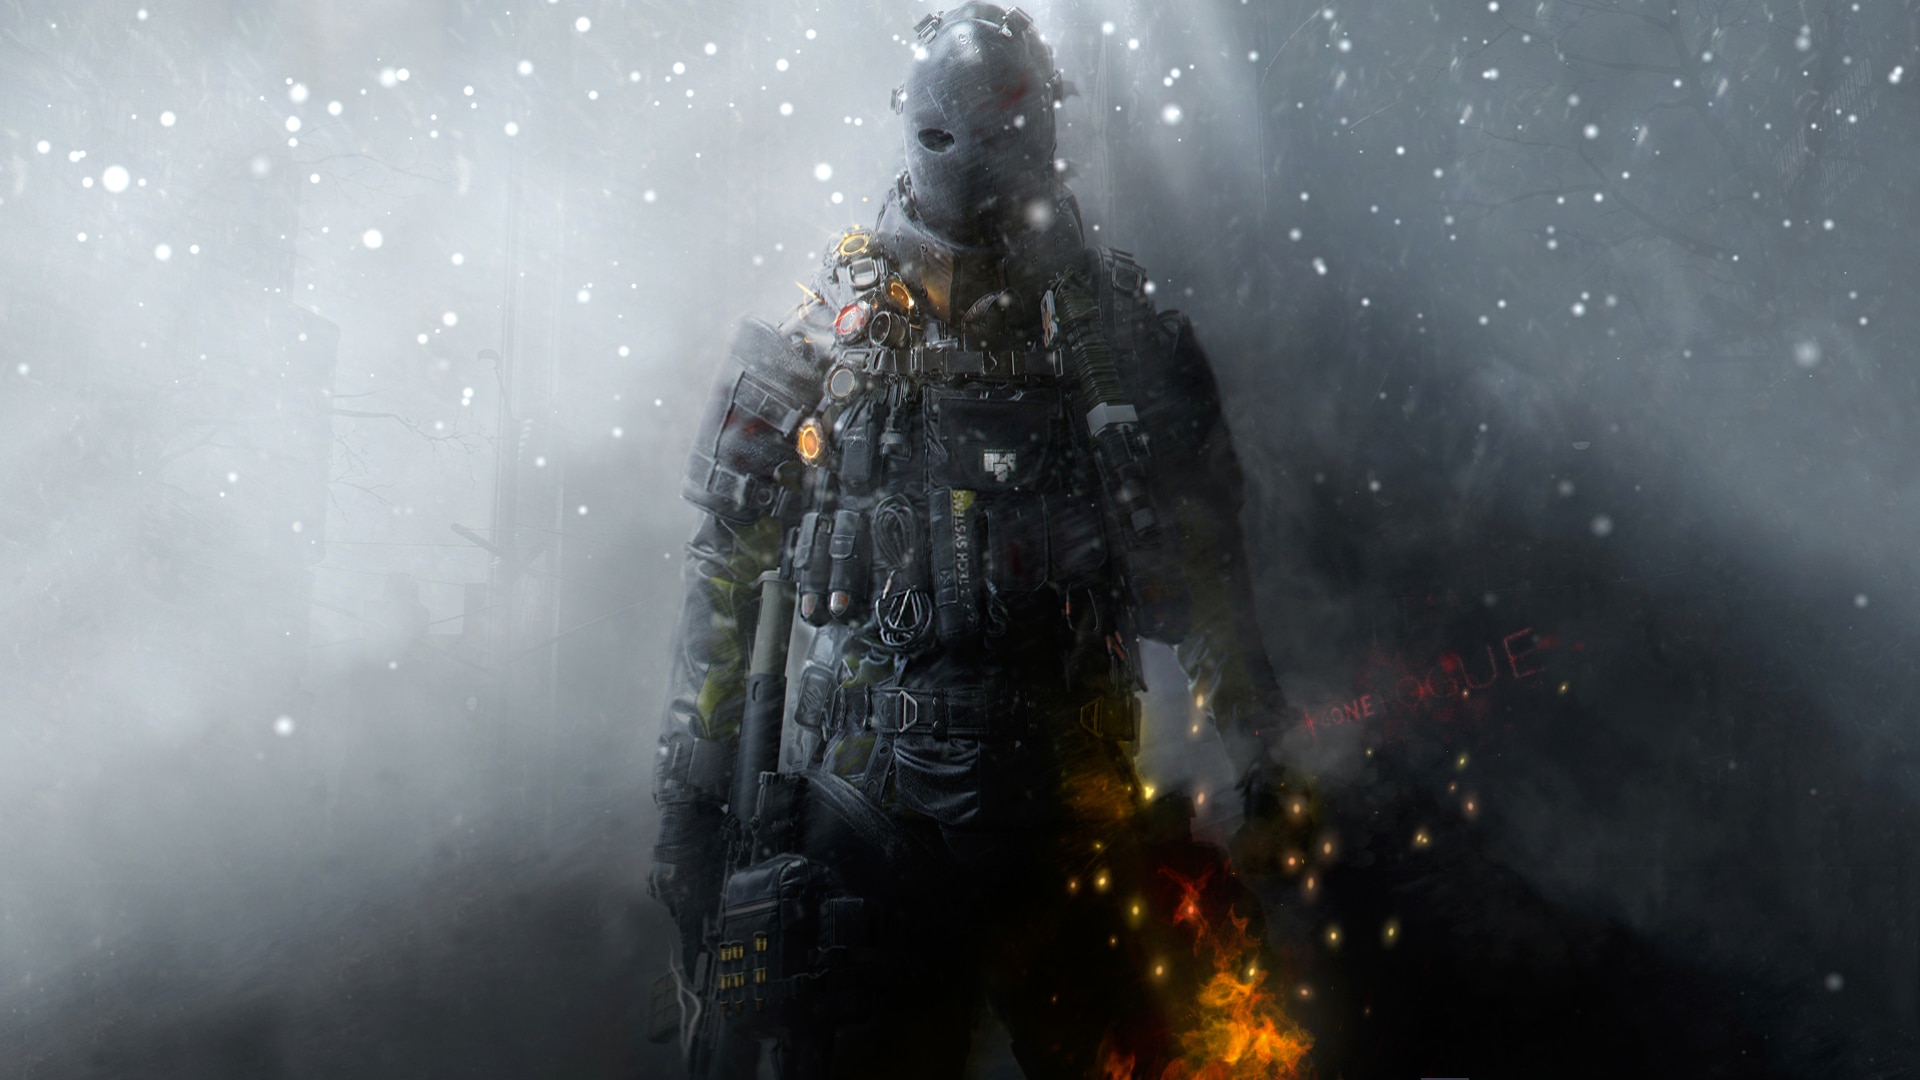 The Division Phone Wallpapers  Top Free The Division Phone Backgrounds   WallpaperAccess